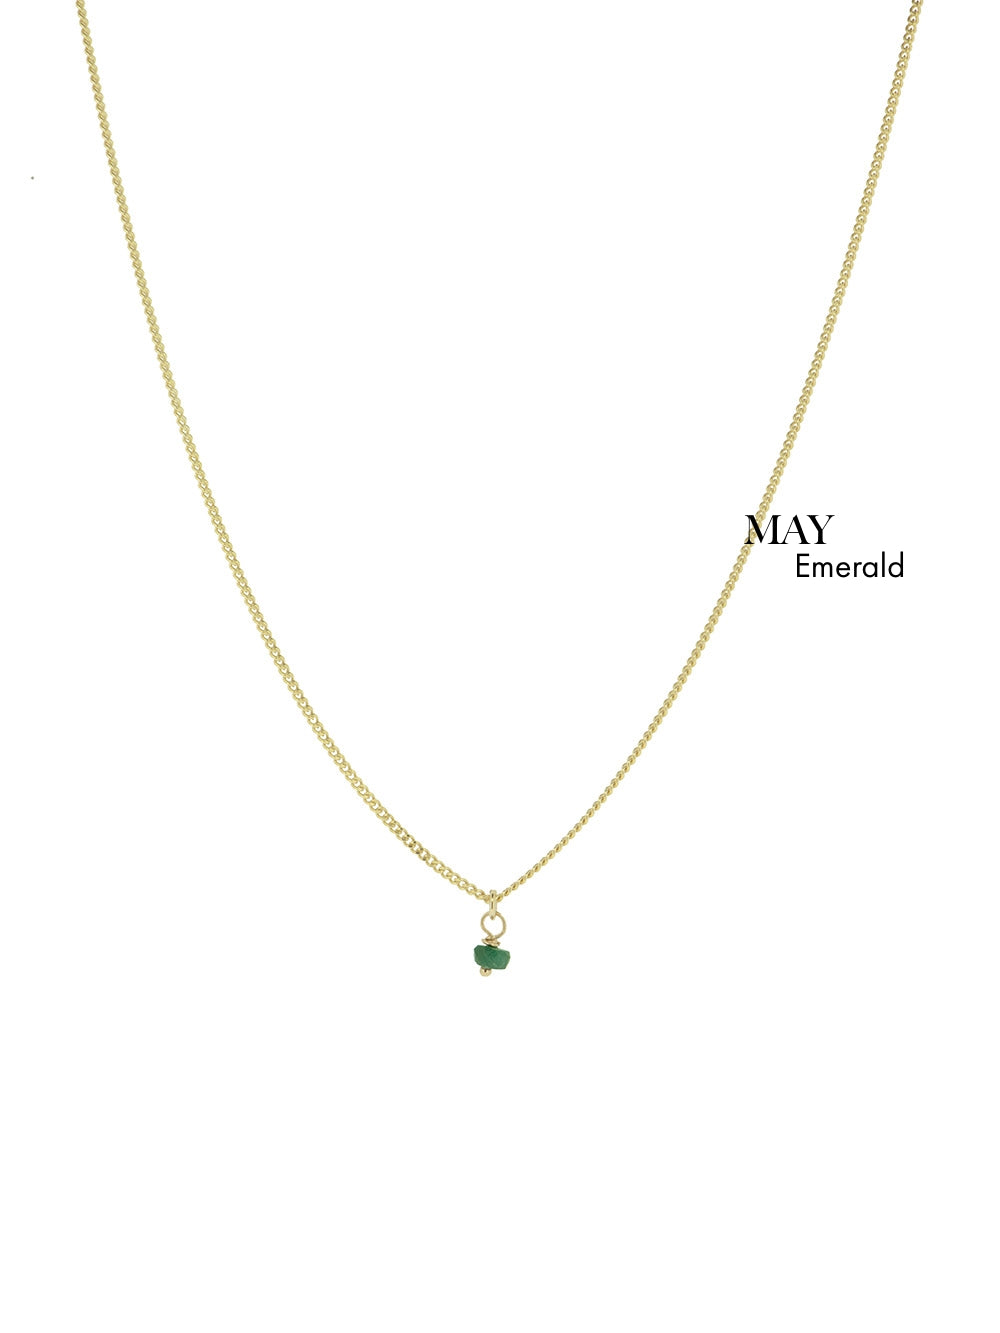 Birthstone May - Emerald | 14K Gold Plated